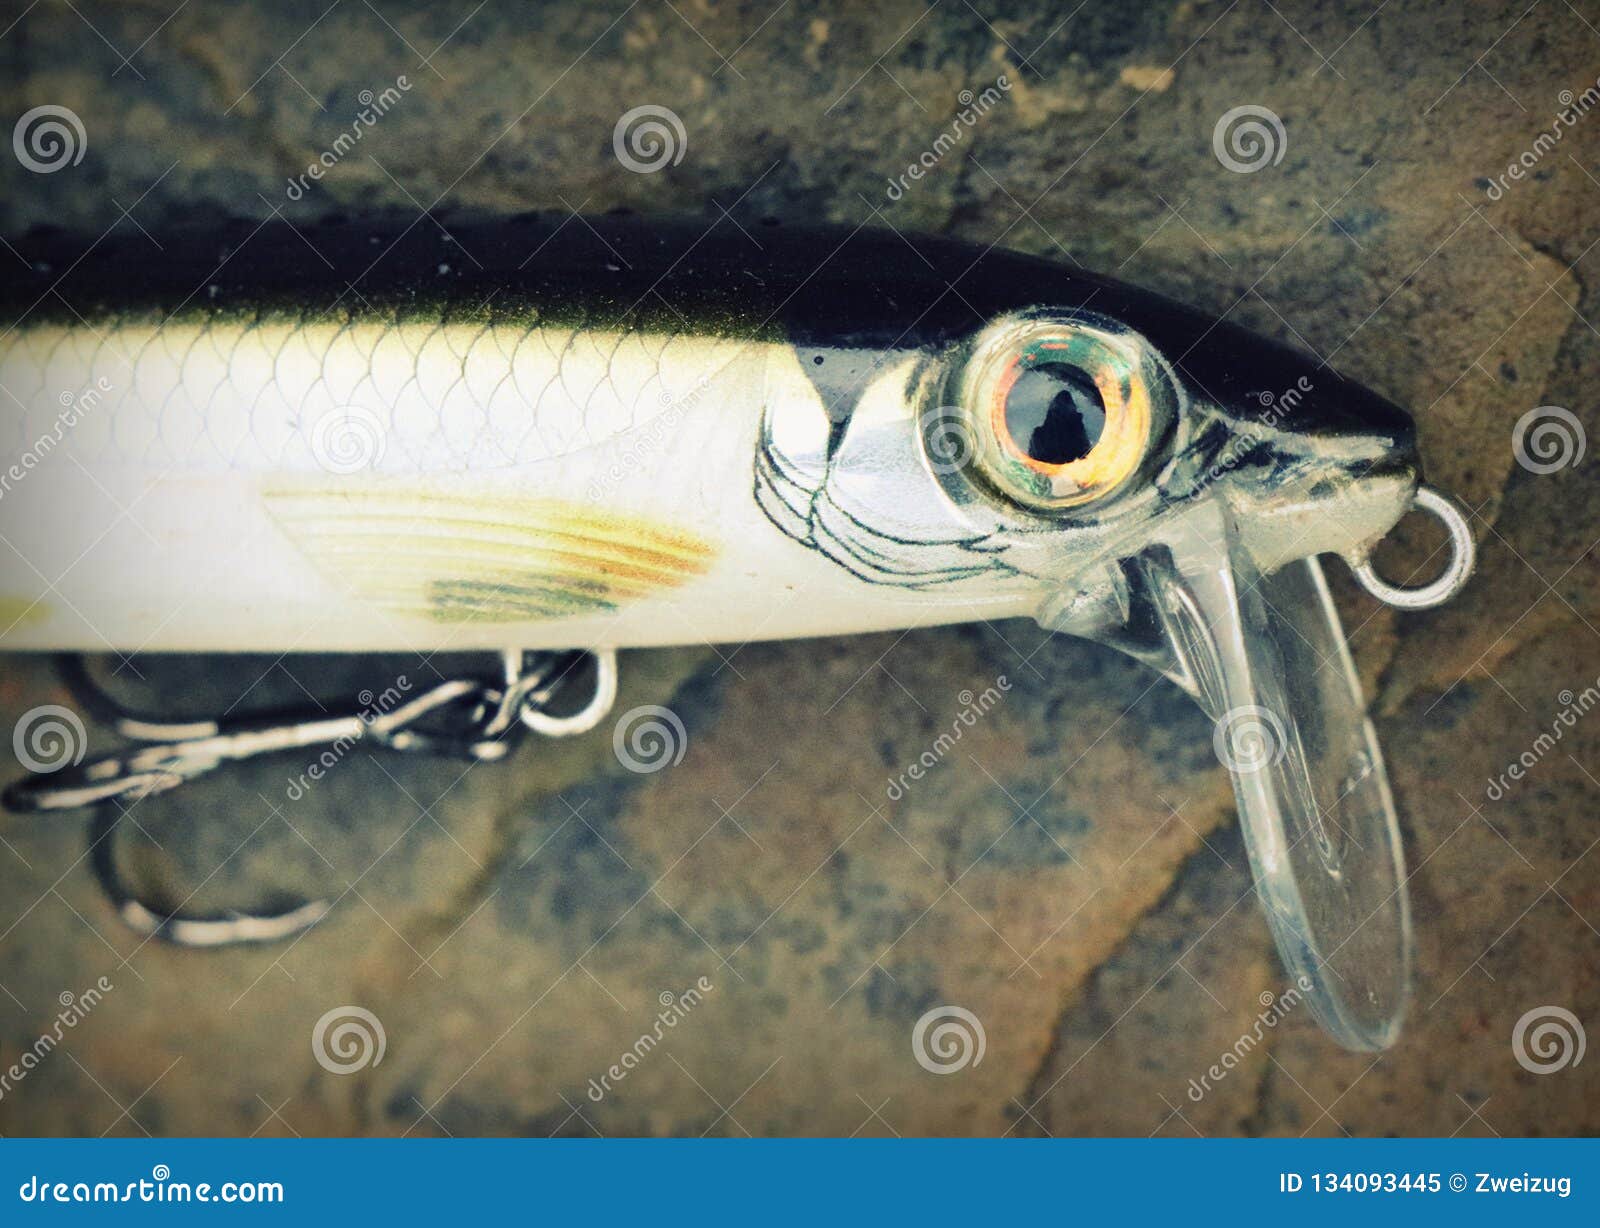 Detail of Floating Surface Fishing Lure Plug Minnow Stock Image - Image of  homemade, pair: 134093445